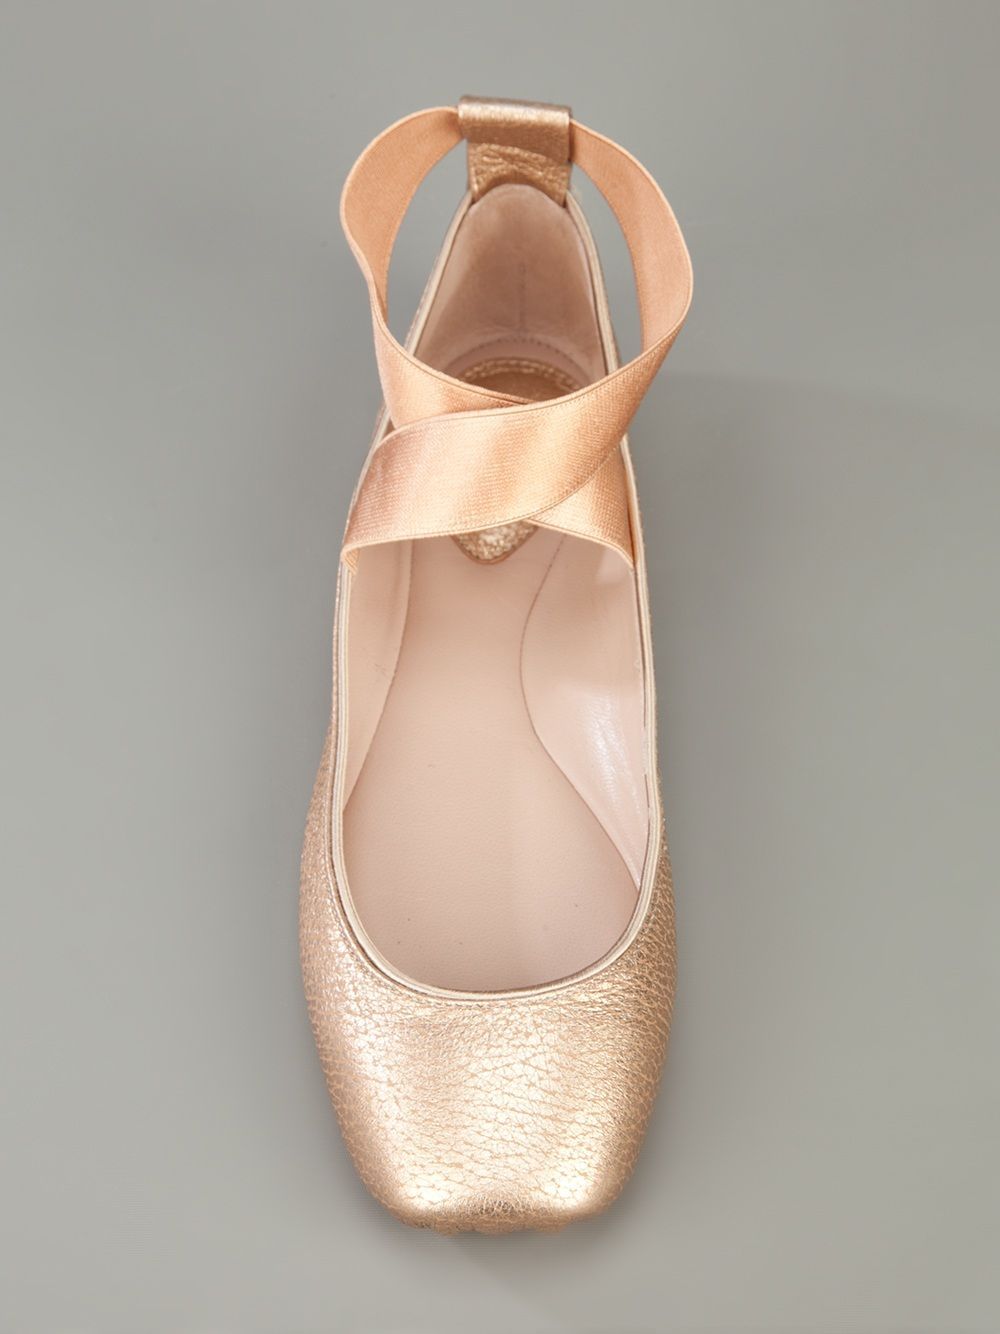 Flats made to look like pointe shoes